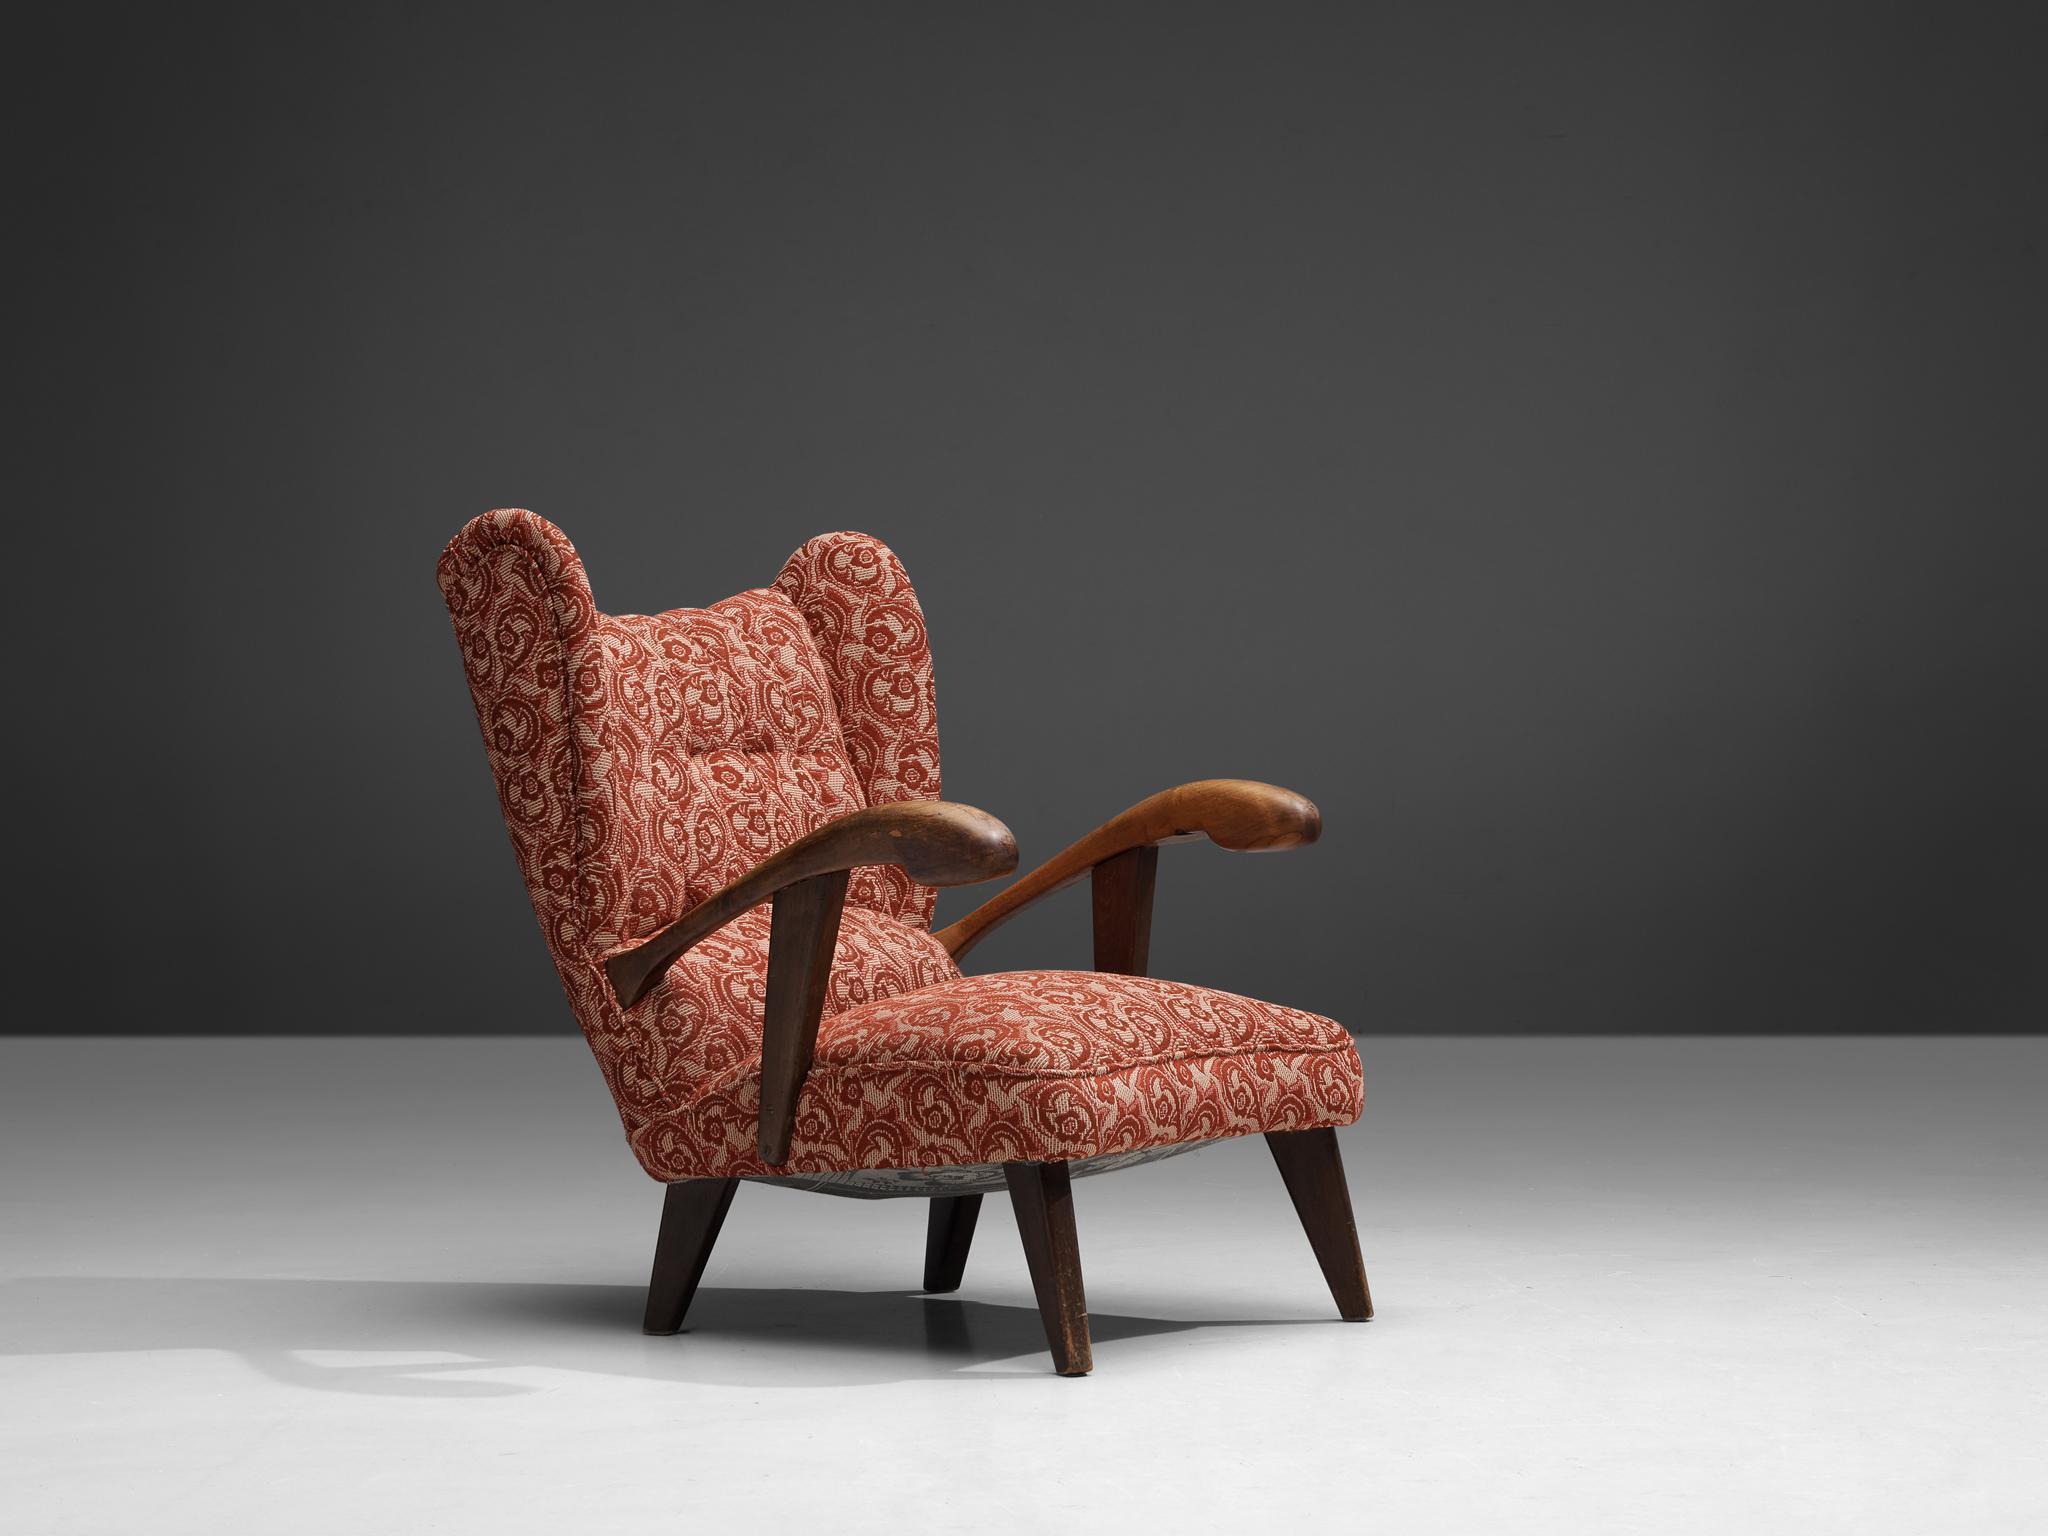 Lounge chair, walnut, fabric, Czech Republic, 1950s. 

This exquisitely crafted lounge chair holds a remarkable construction that showcases sculpted elements evident in its wooden frame and back. The armrests are defined by their bold, curved lines